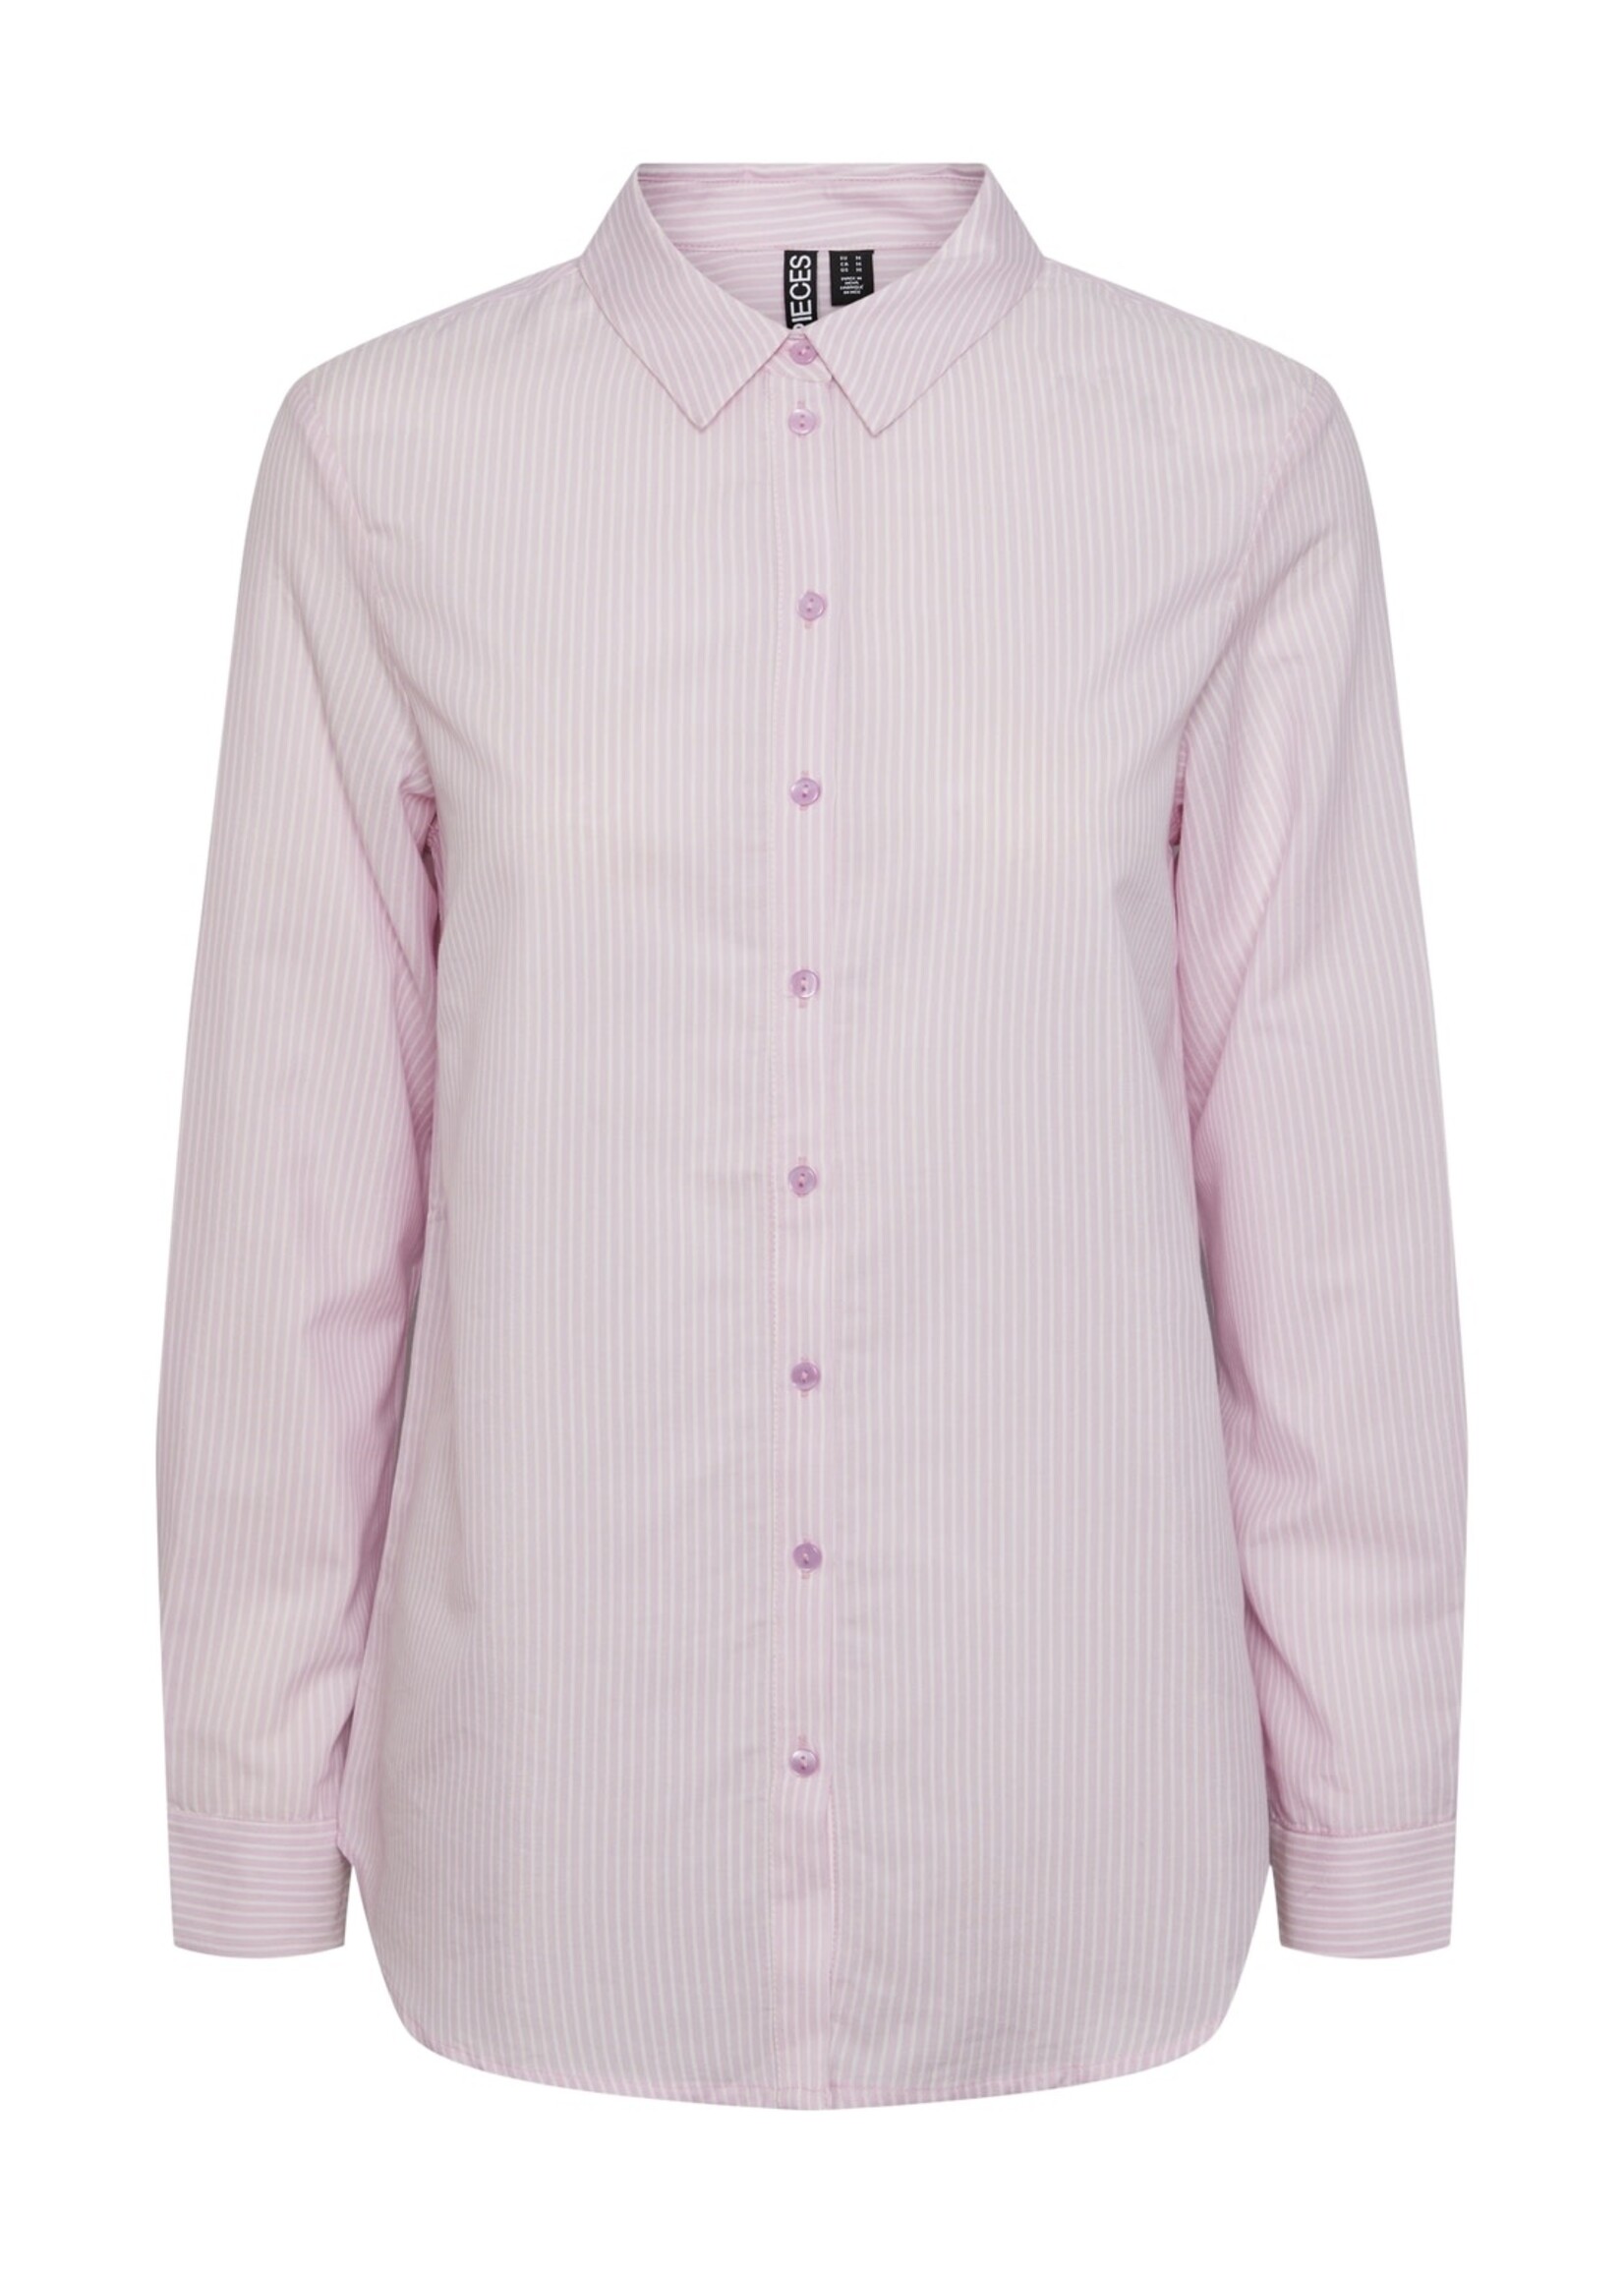 PIECES MARLY LS SHIRT pastel lavender